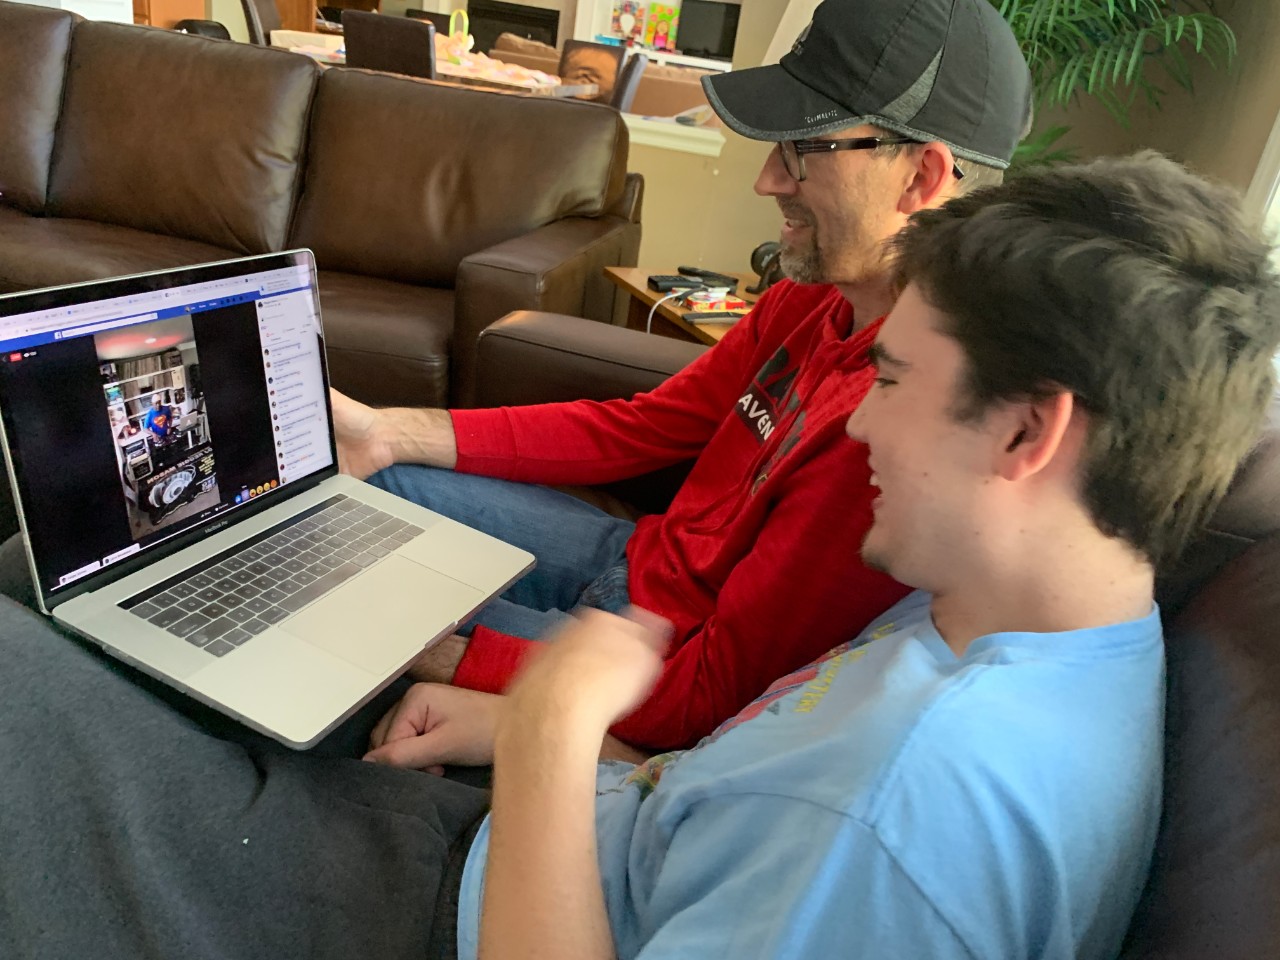 The photo shows a young man with brown hair and a T-shirt excitedly flapping his hands, while he watches an online livestream of his school principal playing music for students. His dad sits next to Aidan, holding the laptop on his lap in their living room and smiling.